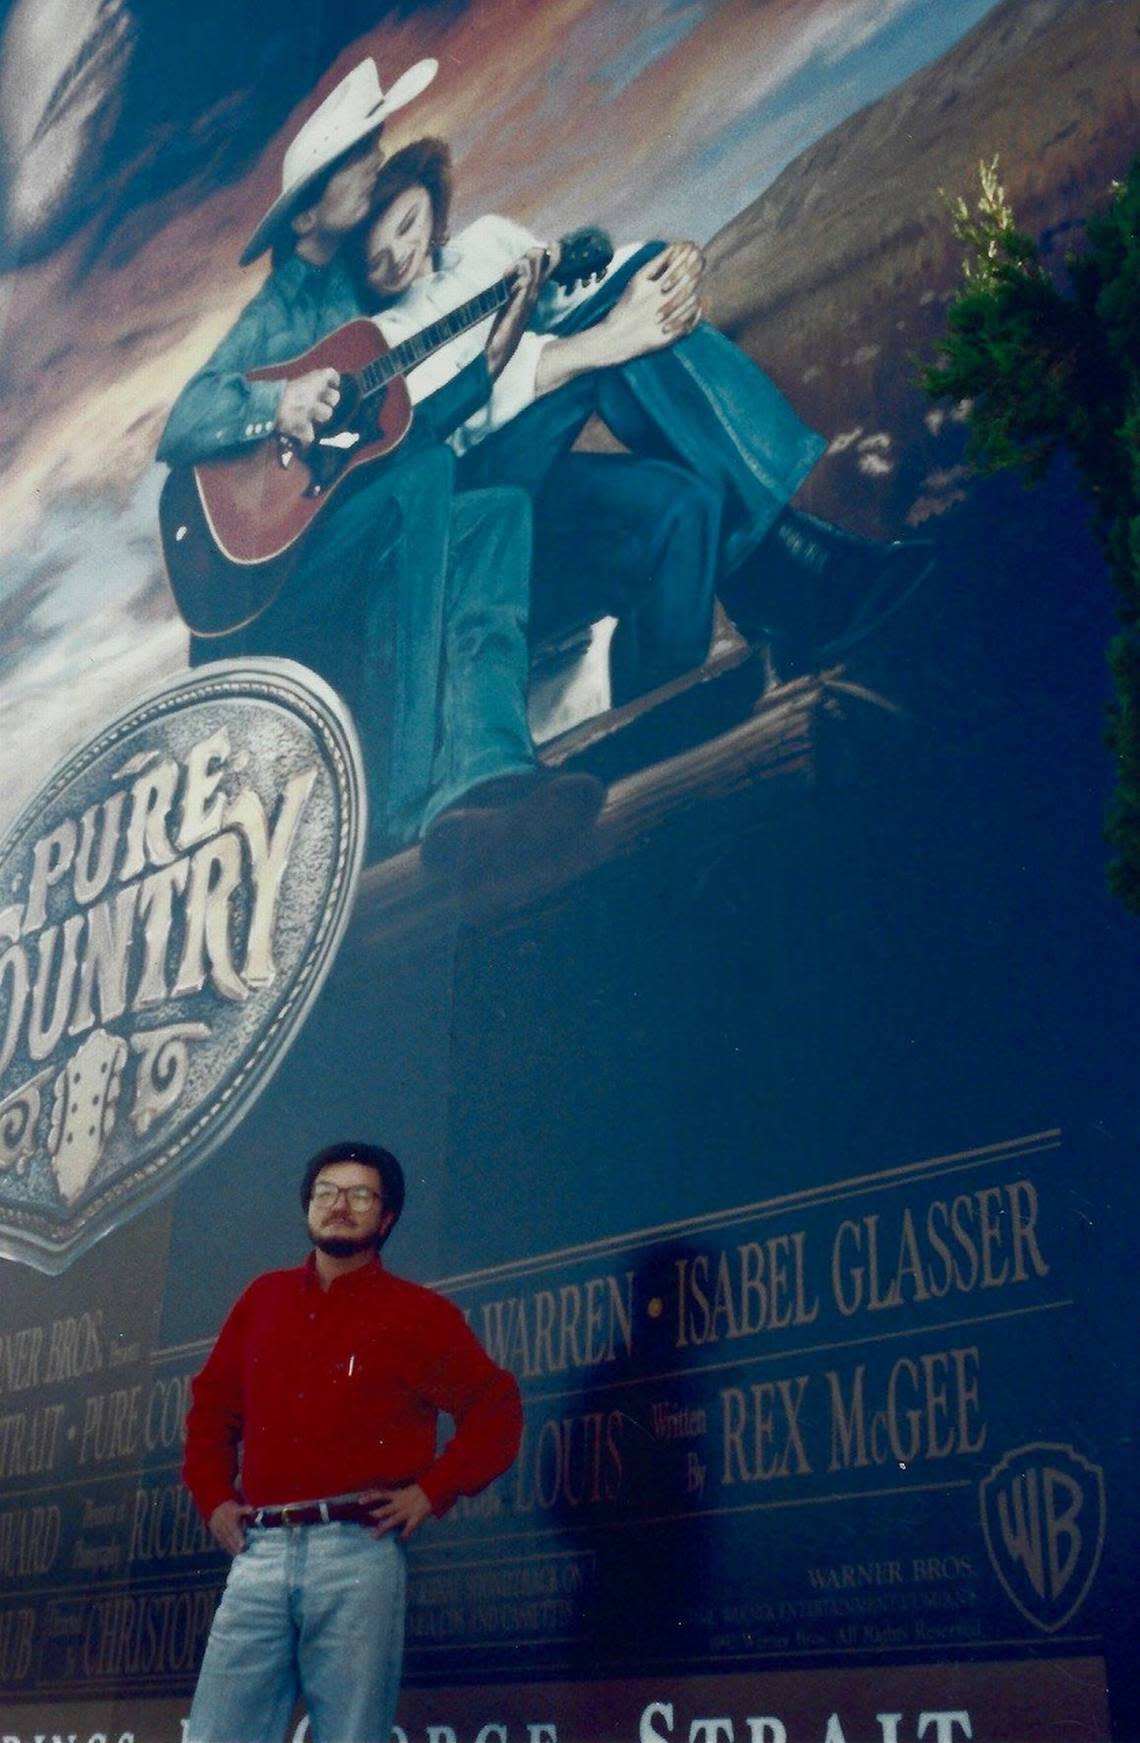 “Pure Country” screenwriter and North Texas native Rex McGee stands below a billboard of his movie.